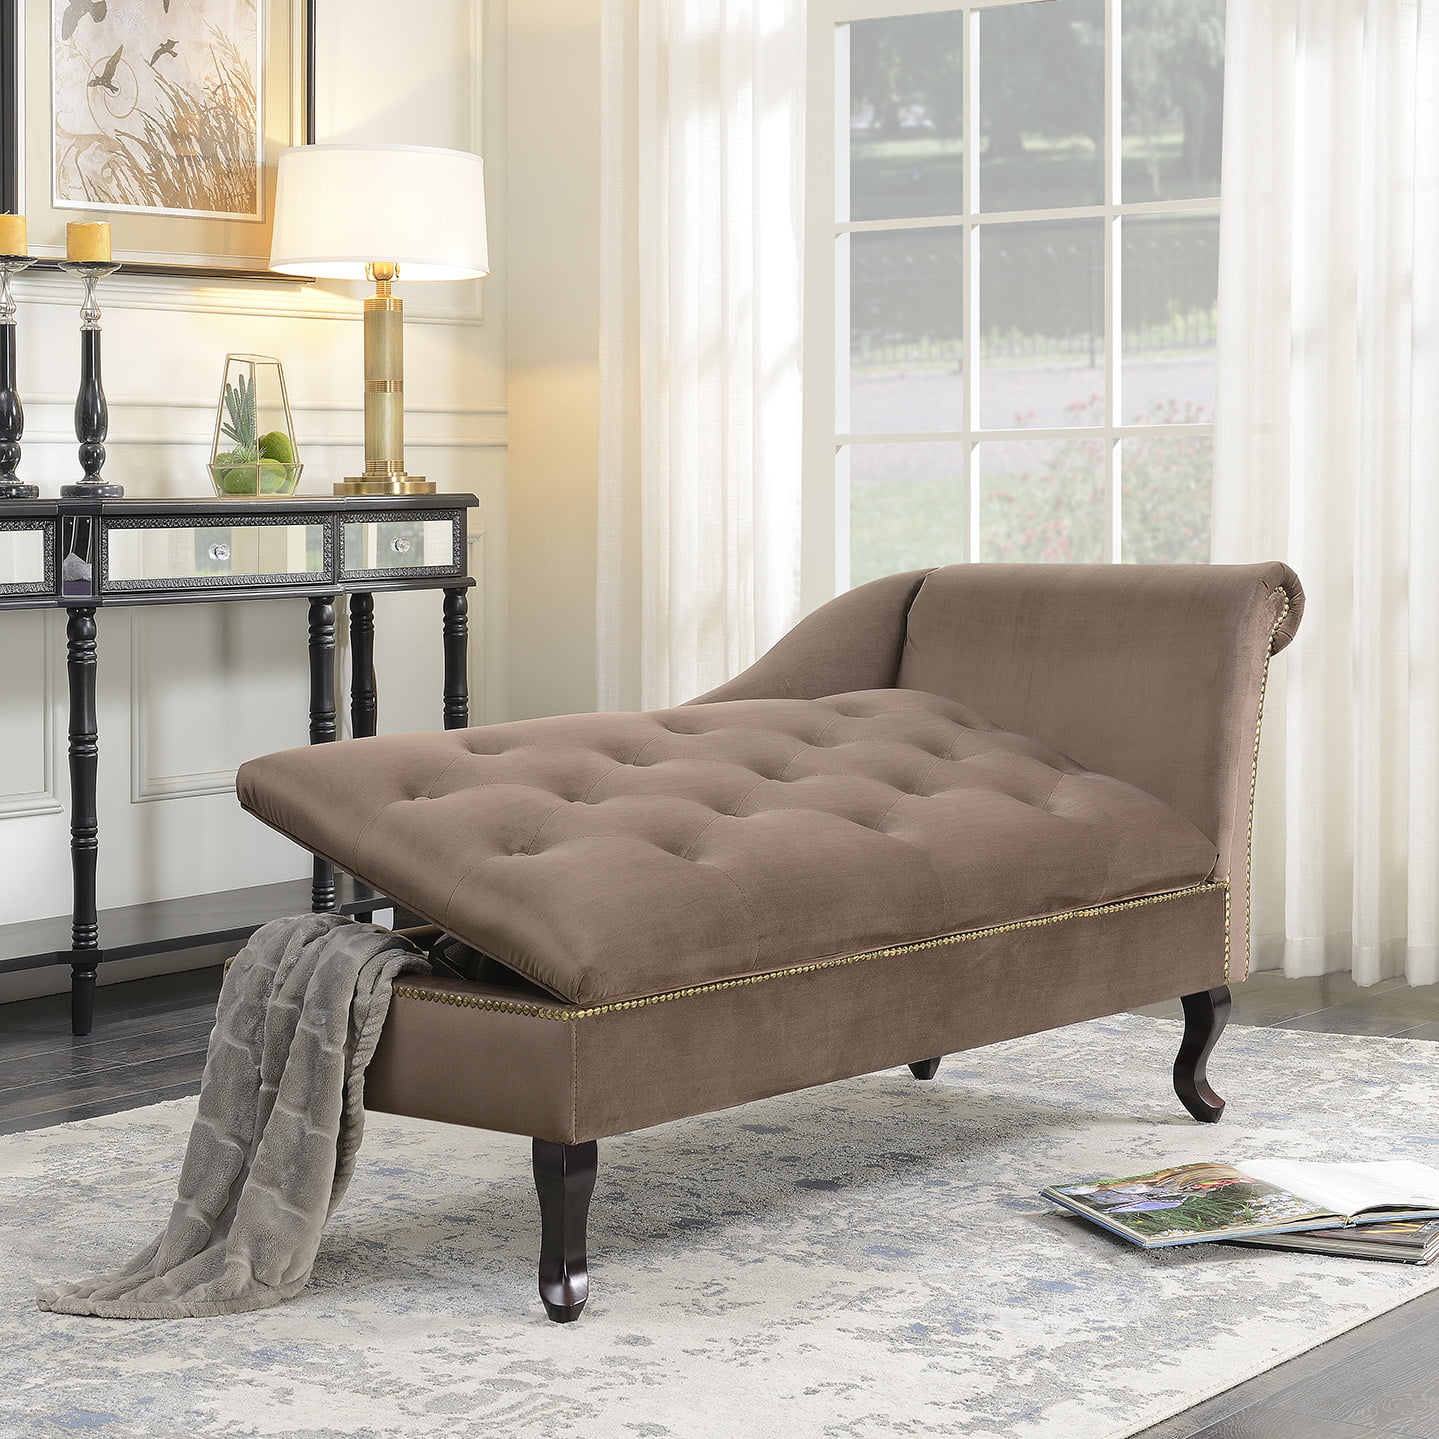 Belleze Velveteen Tufted Chaise Lounge Chair Couch for ...